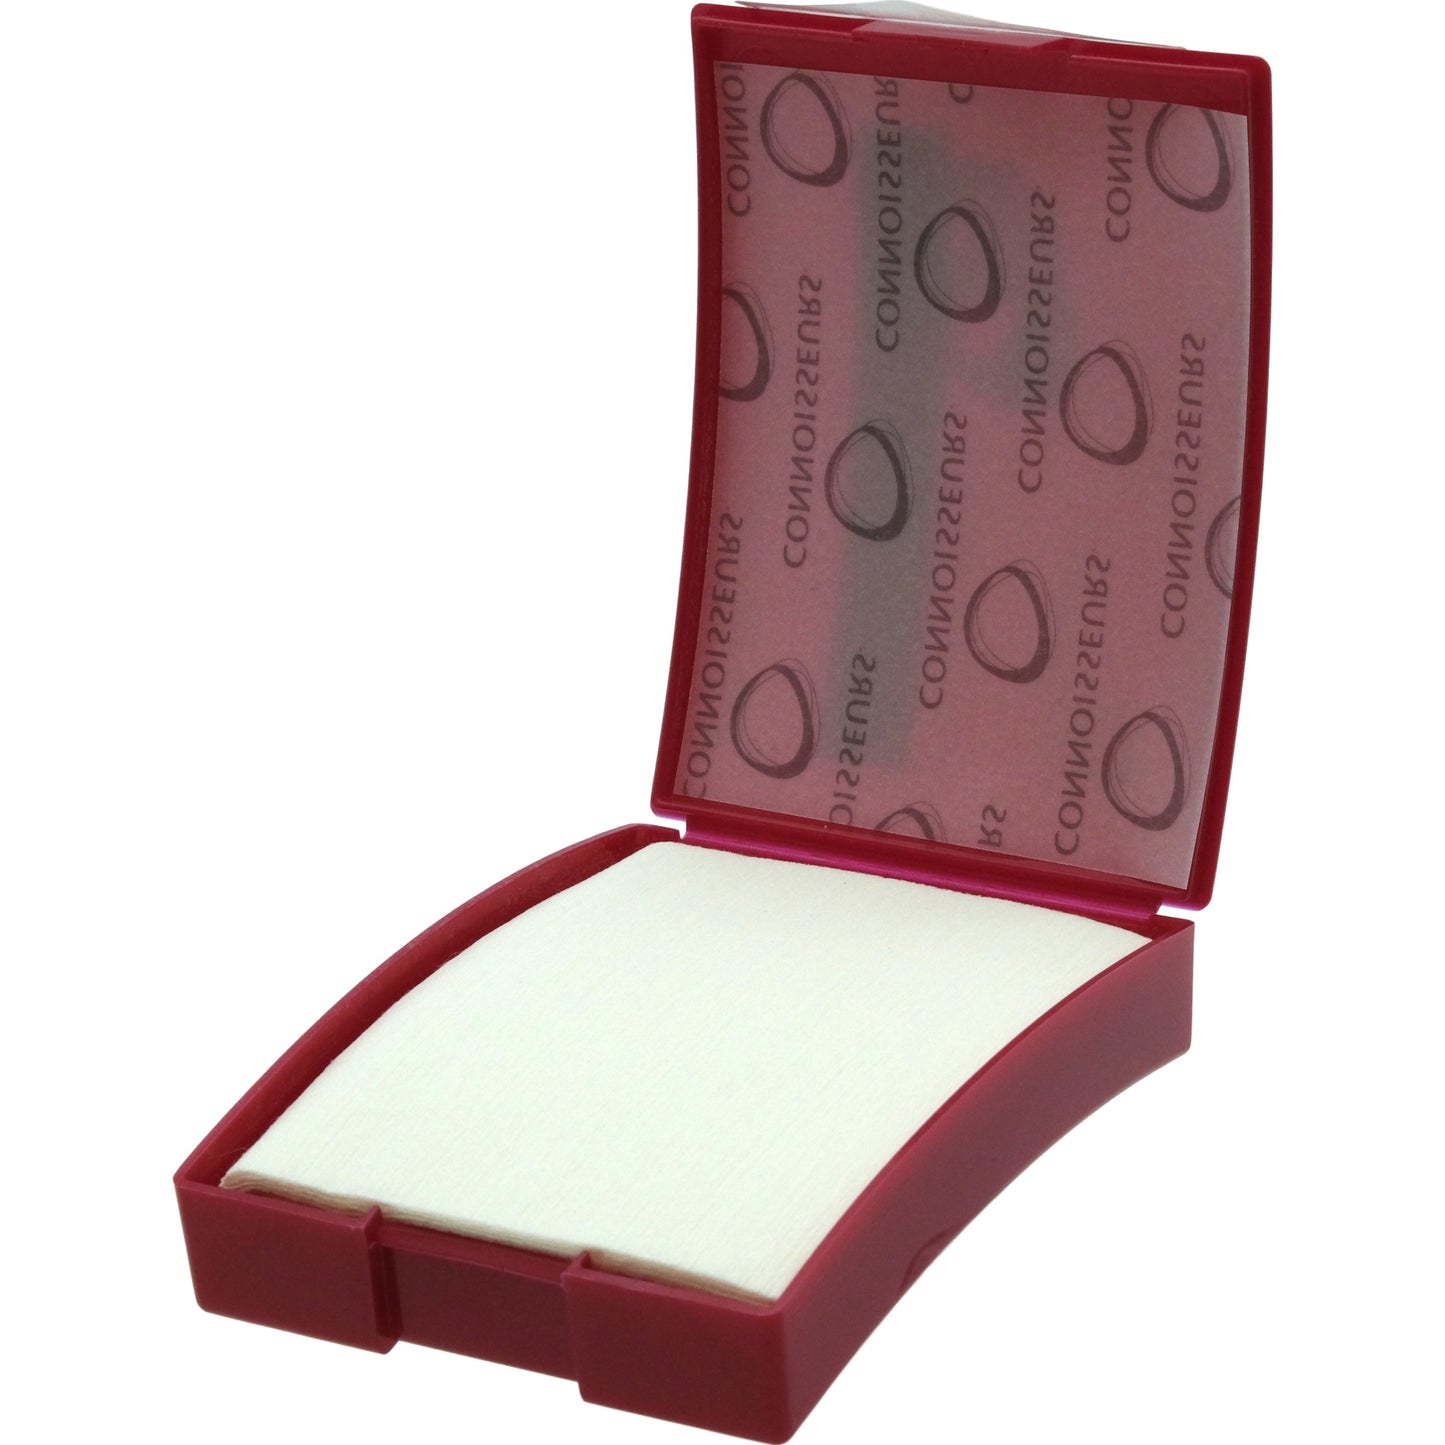 Connoisseurs Jewelry Wipes Case of 12 Boxes of 25 Wipes